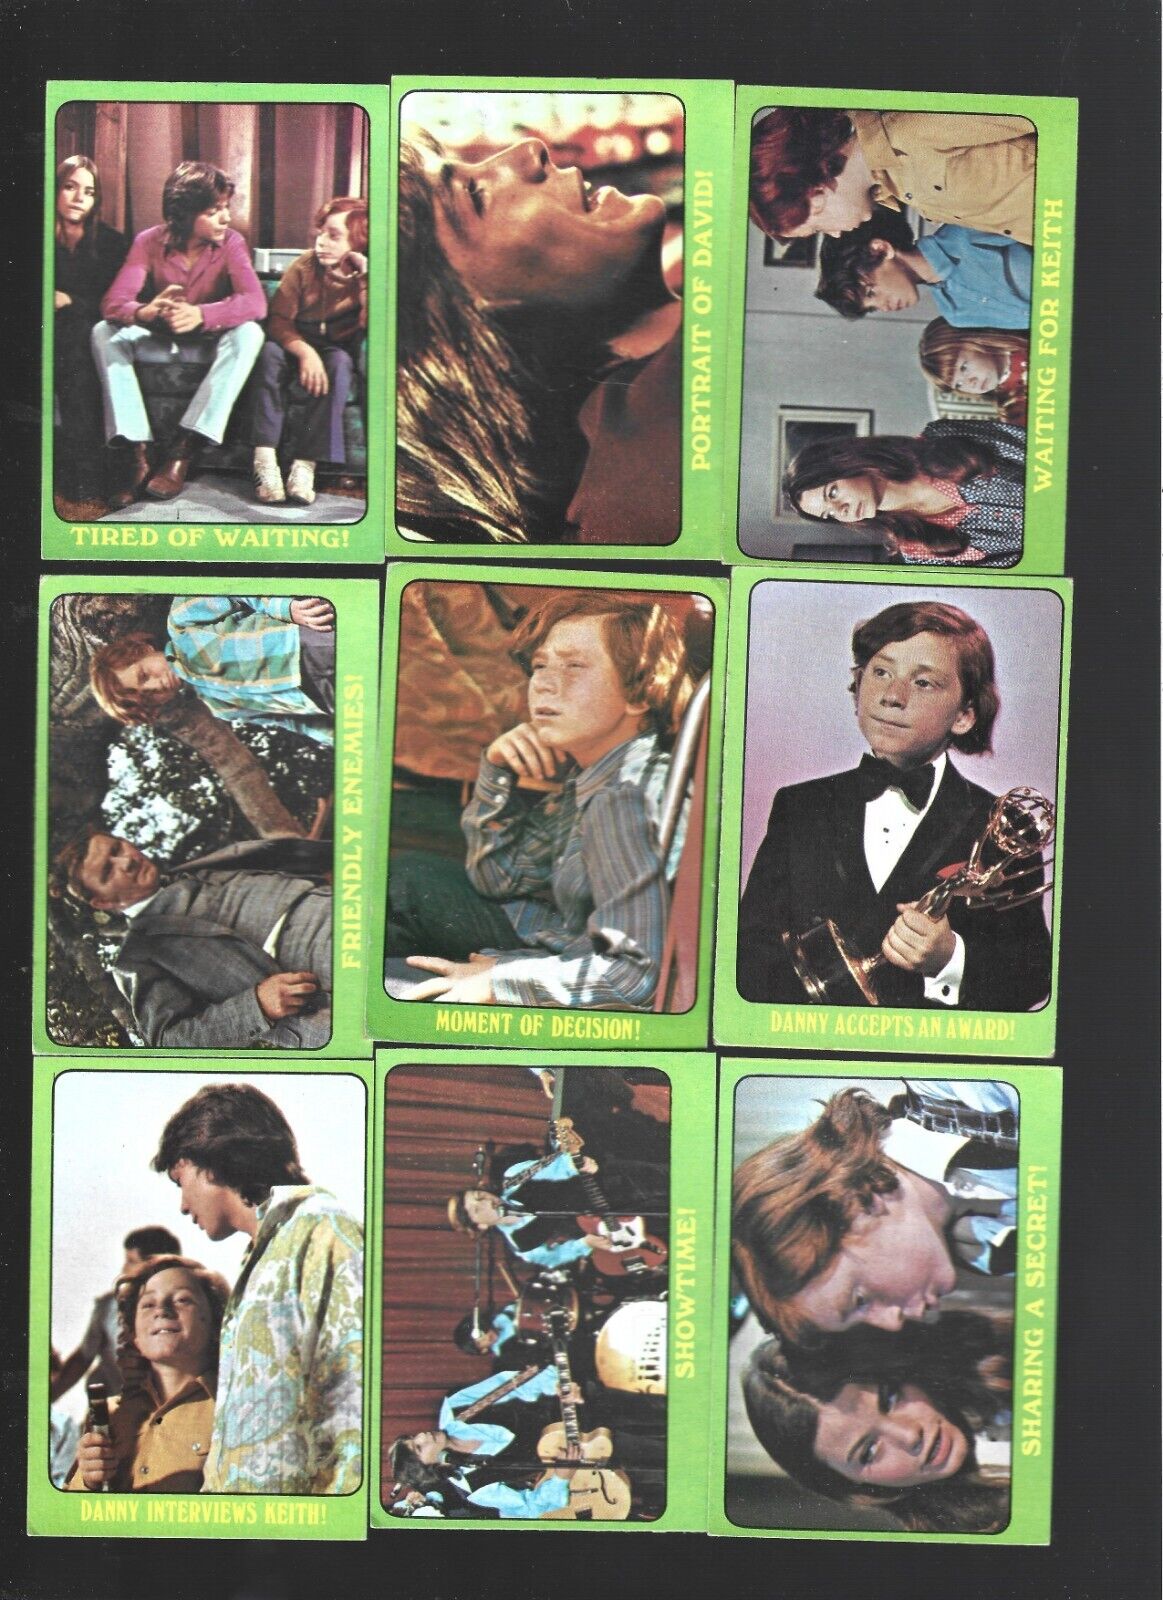 1971 TOPPS THE PARTRIDGE FAMILY SERIES (GREEN) -LOT OF 27 CARDS-VG